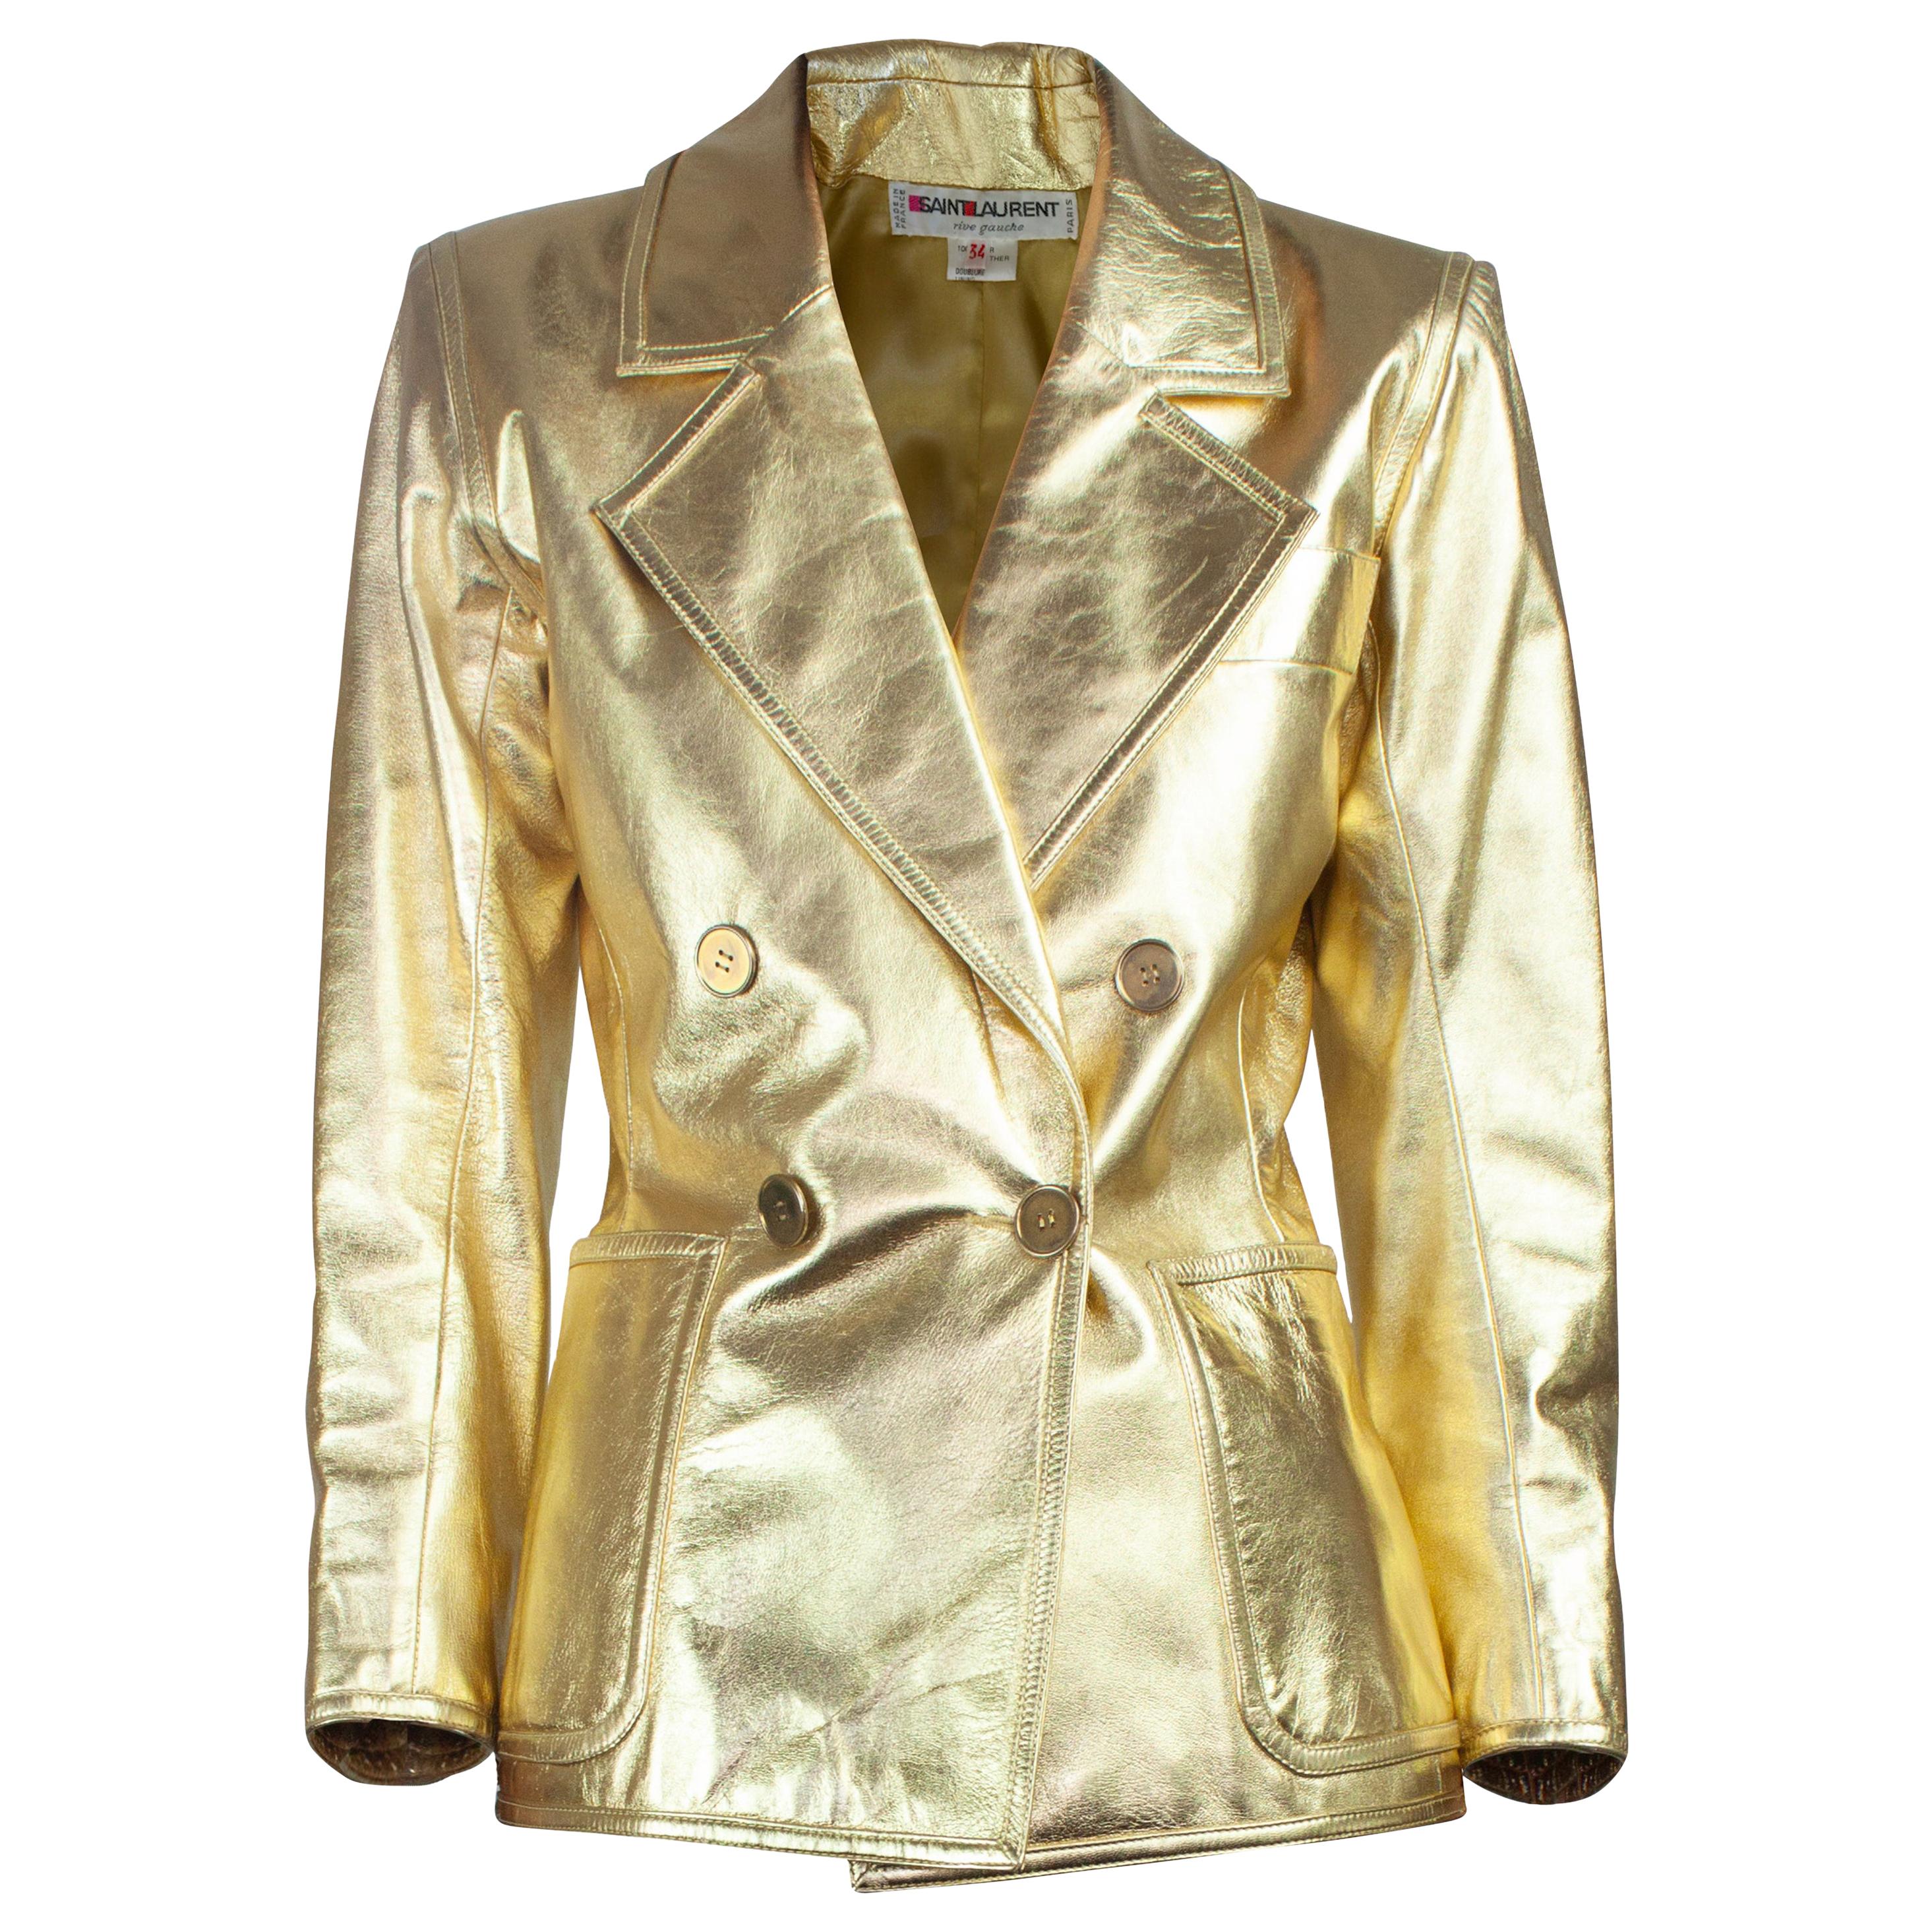 Yves Saint Laurent documented  gold leather jacket. Circa 1970s